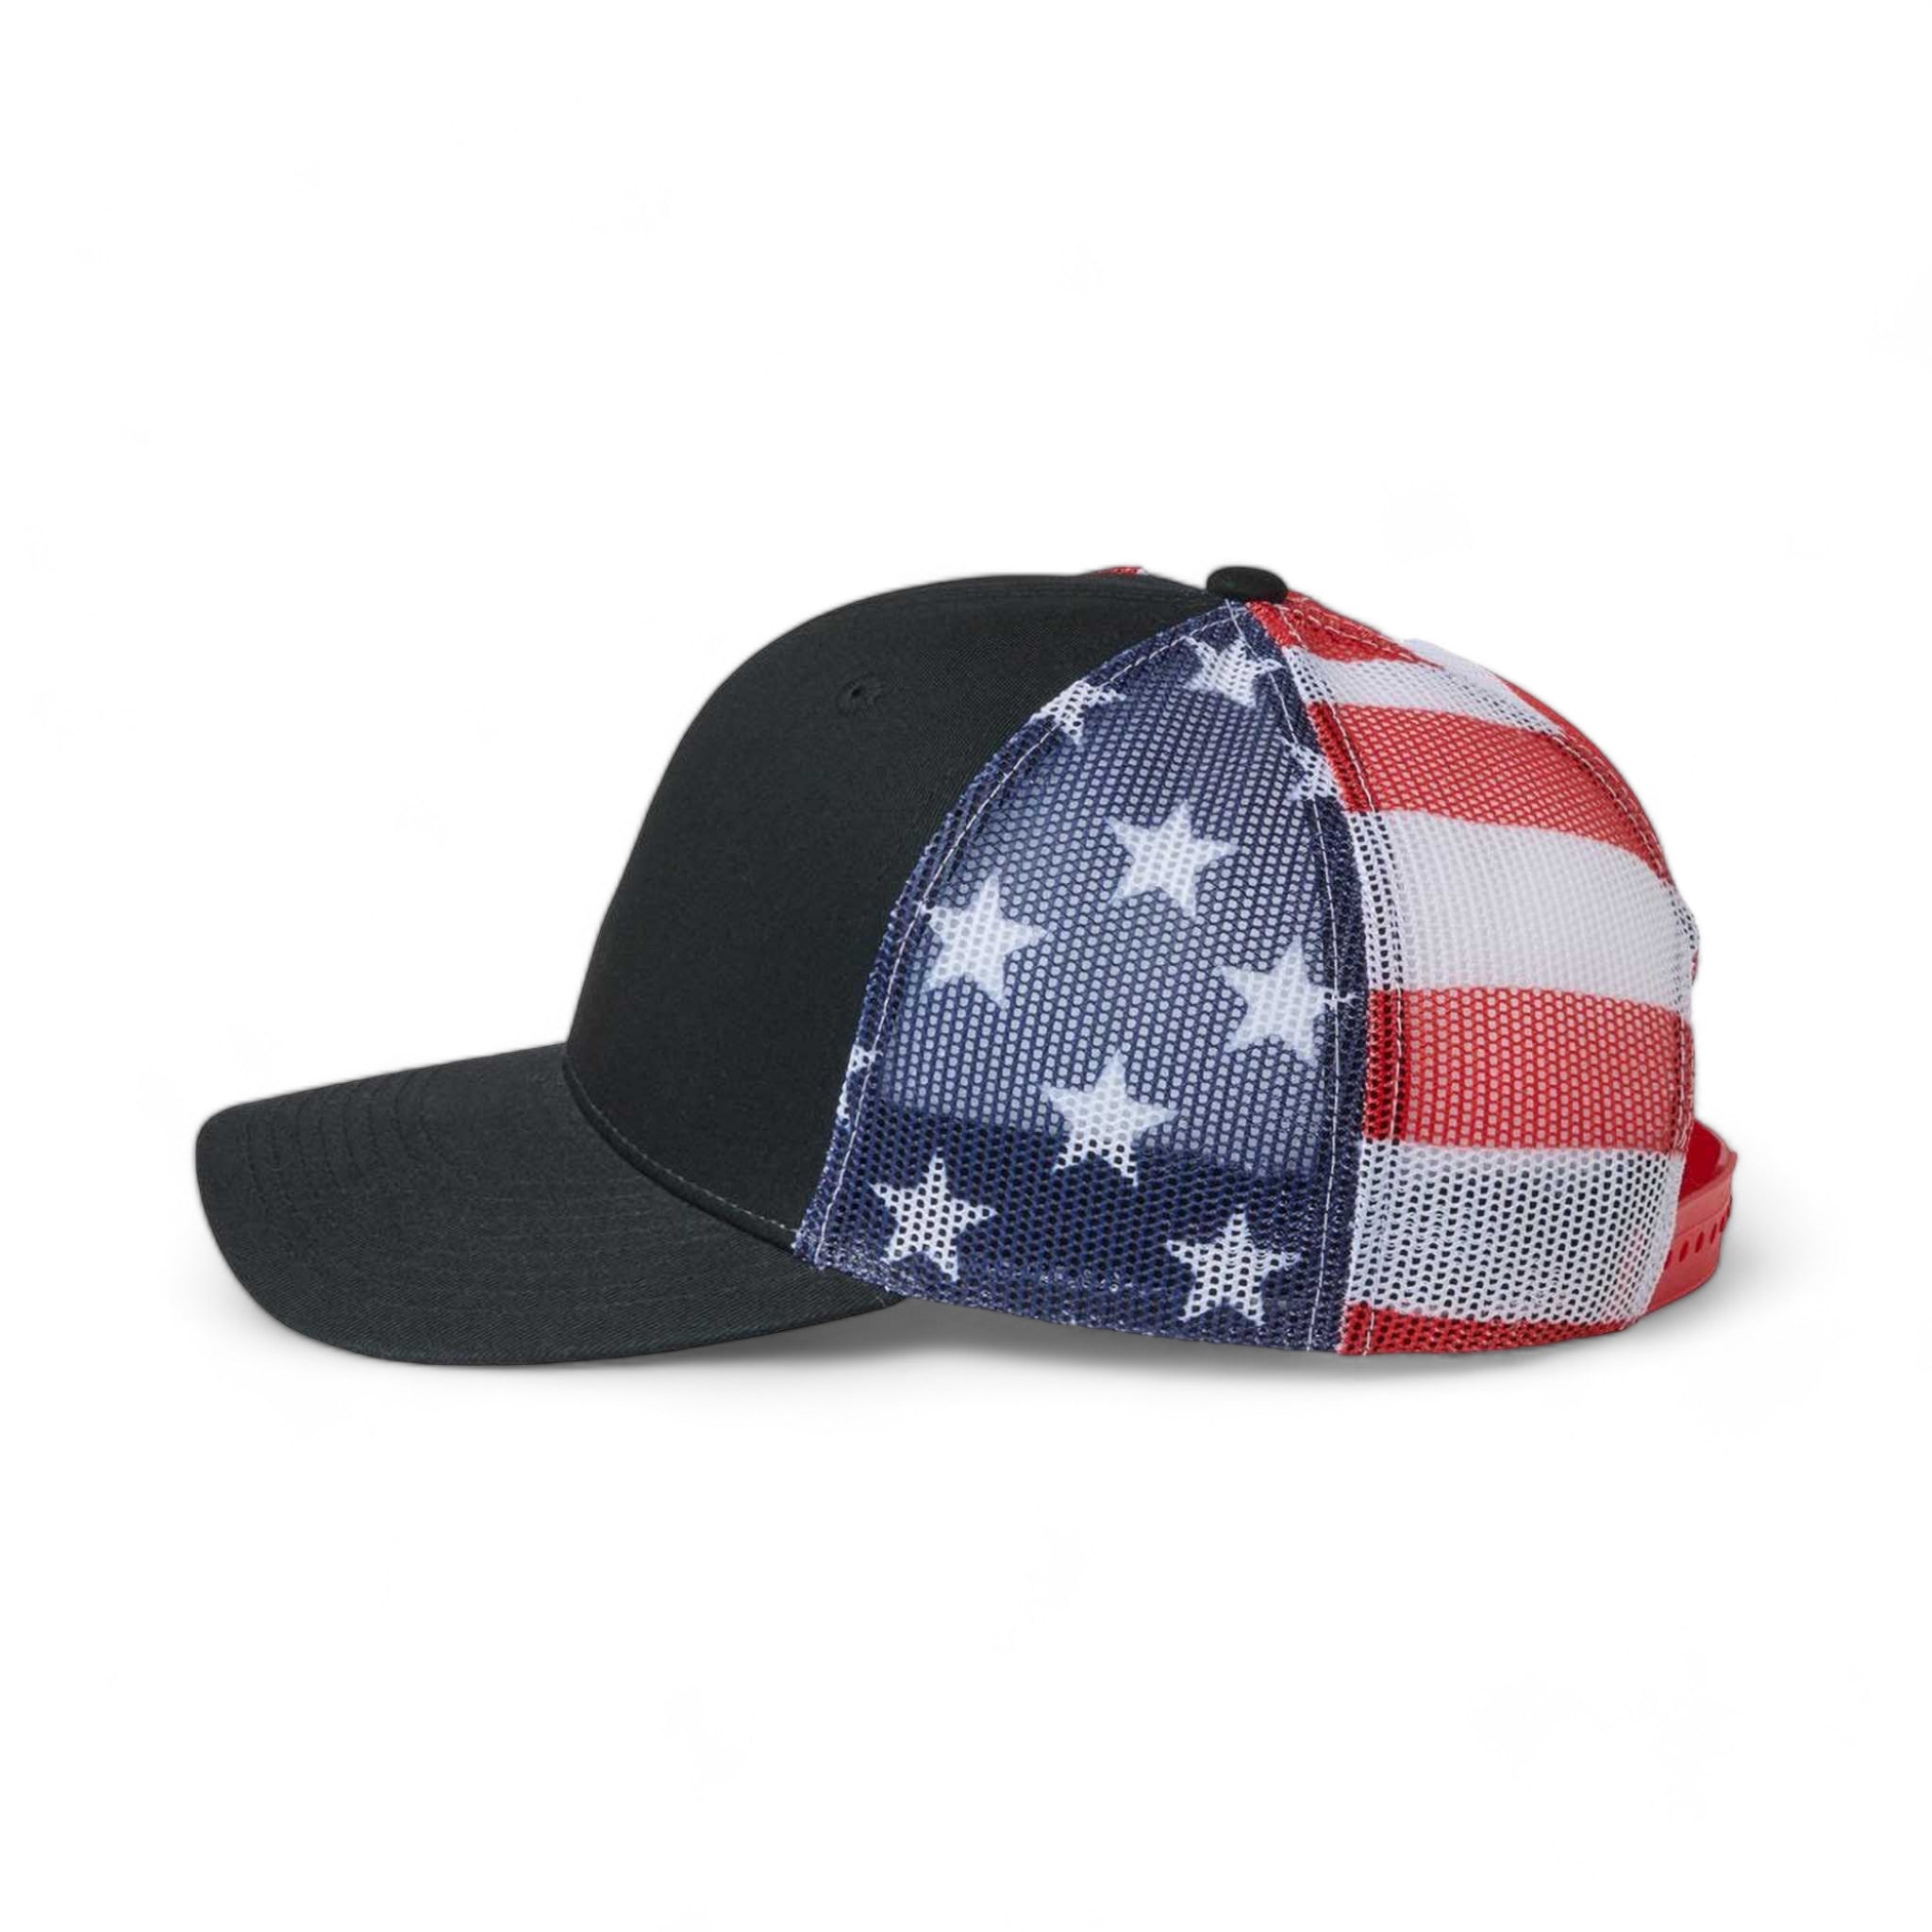 Side view of Kati S700M custom hat in black and usa flag